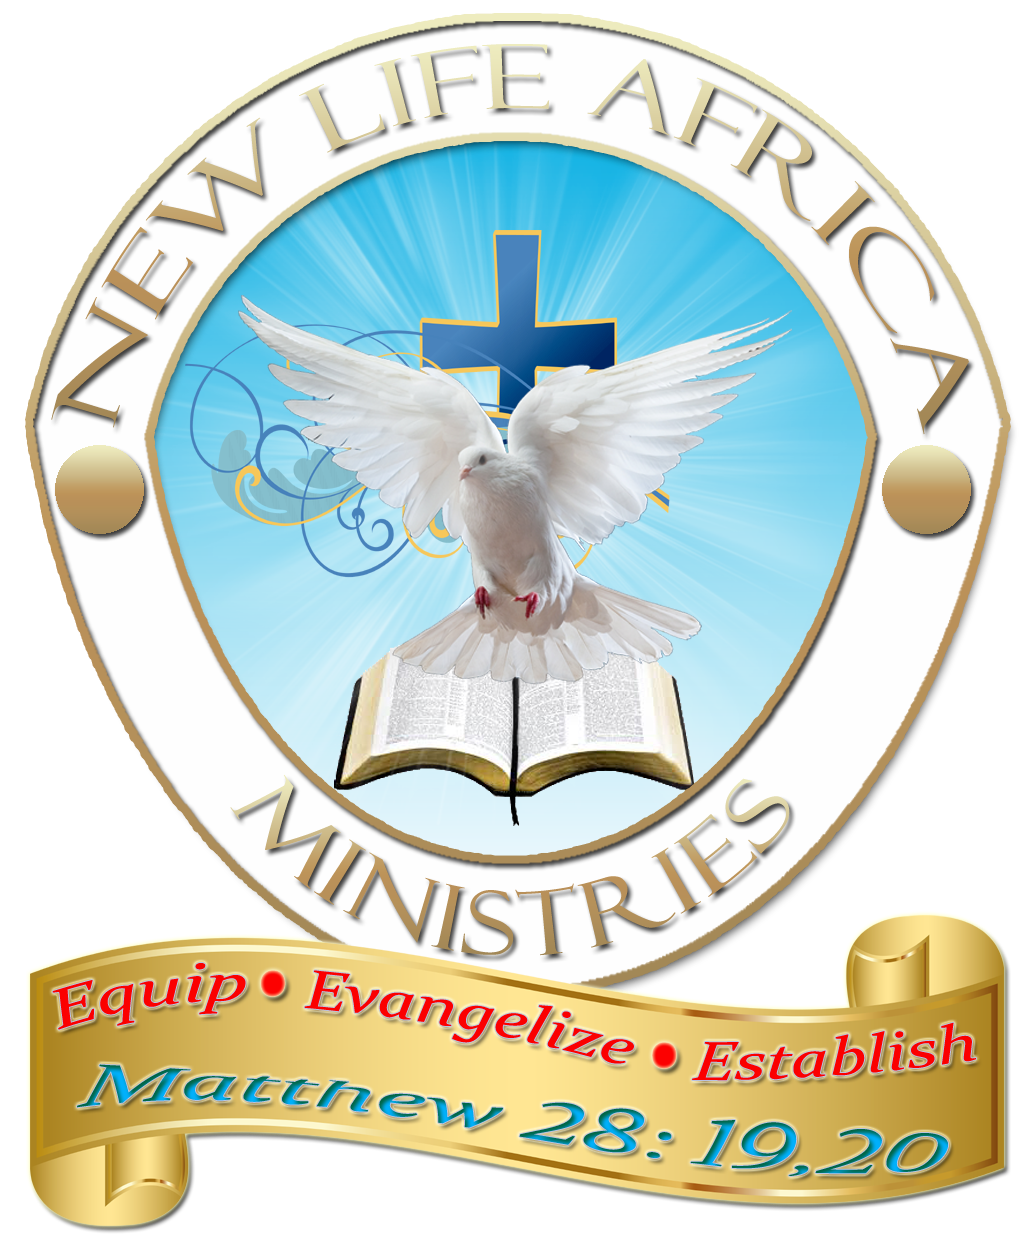 NEW LIFE AFRICA MINISTRIES